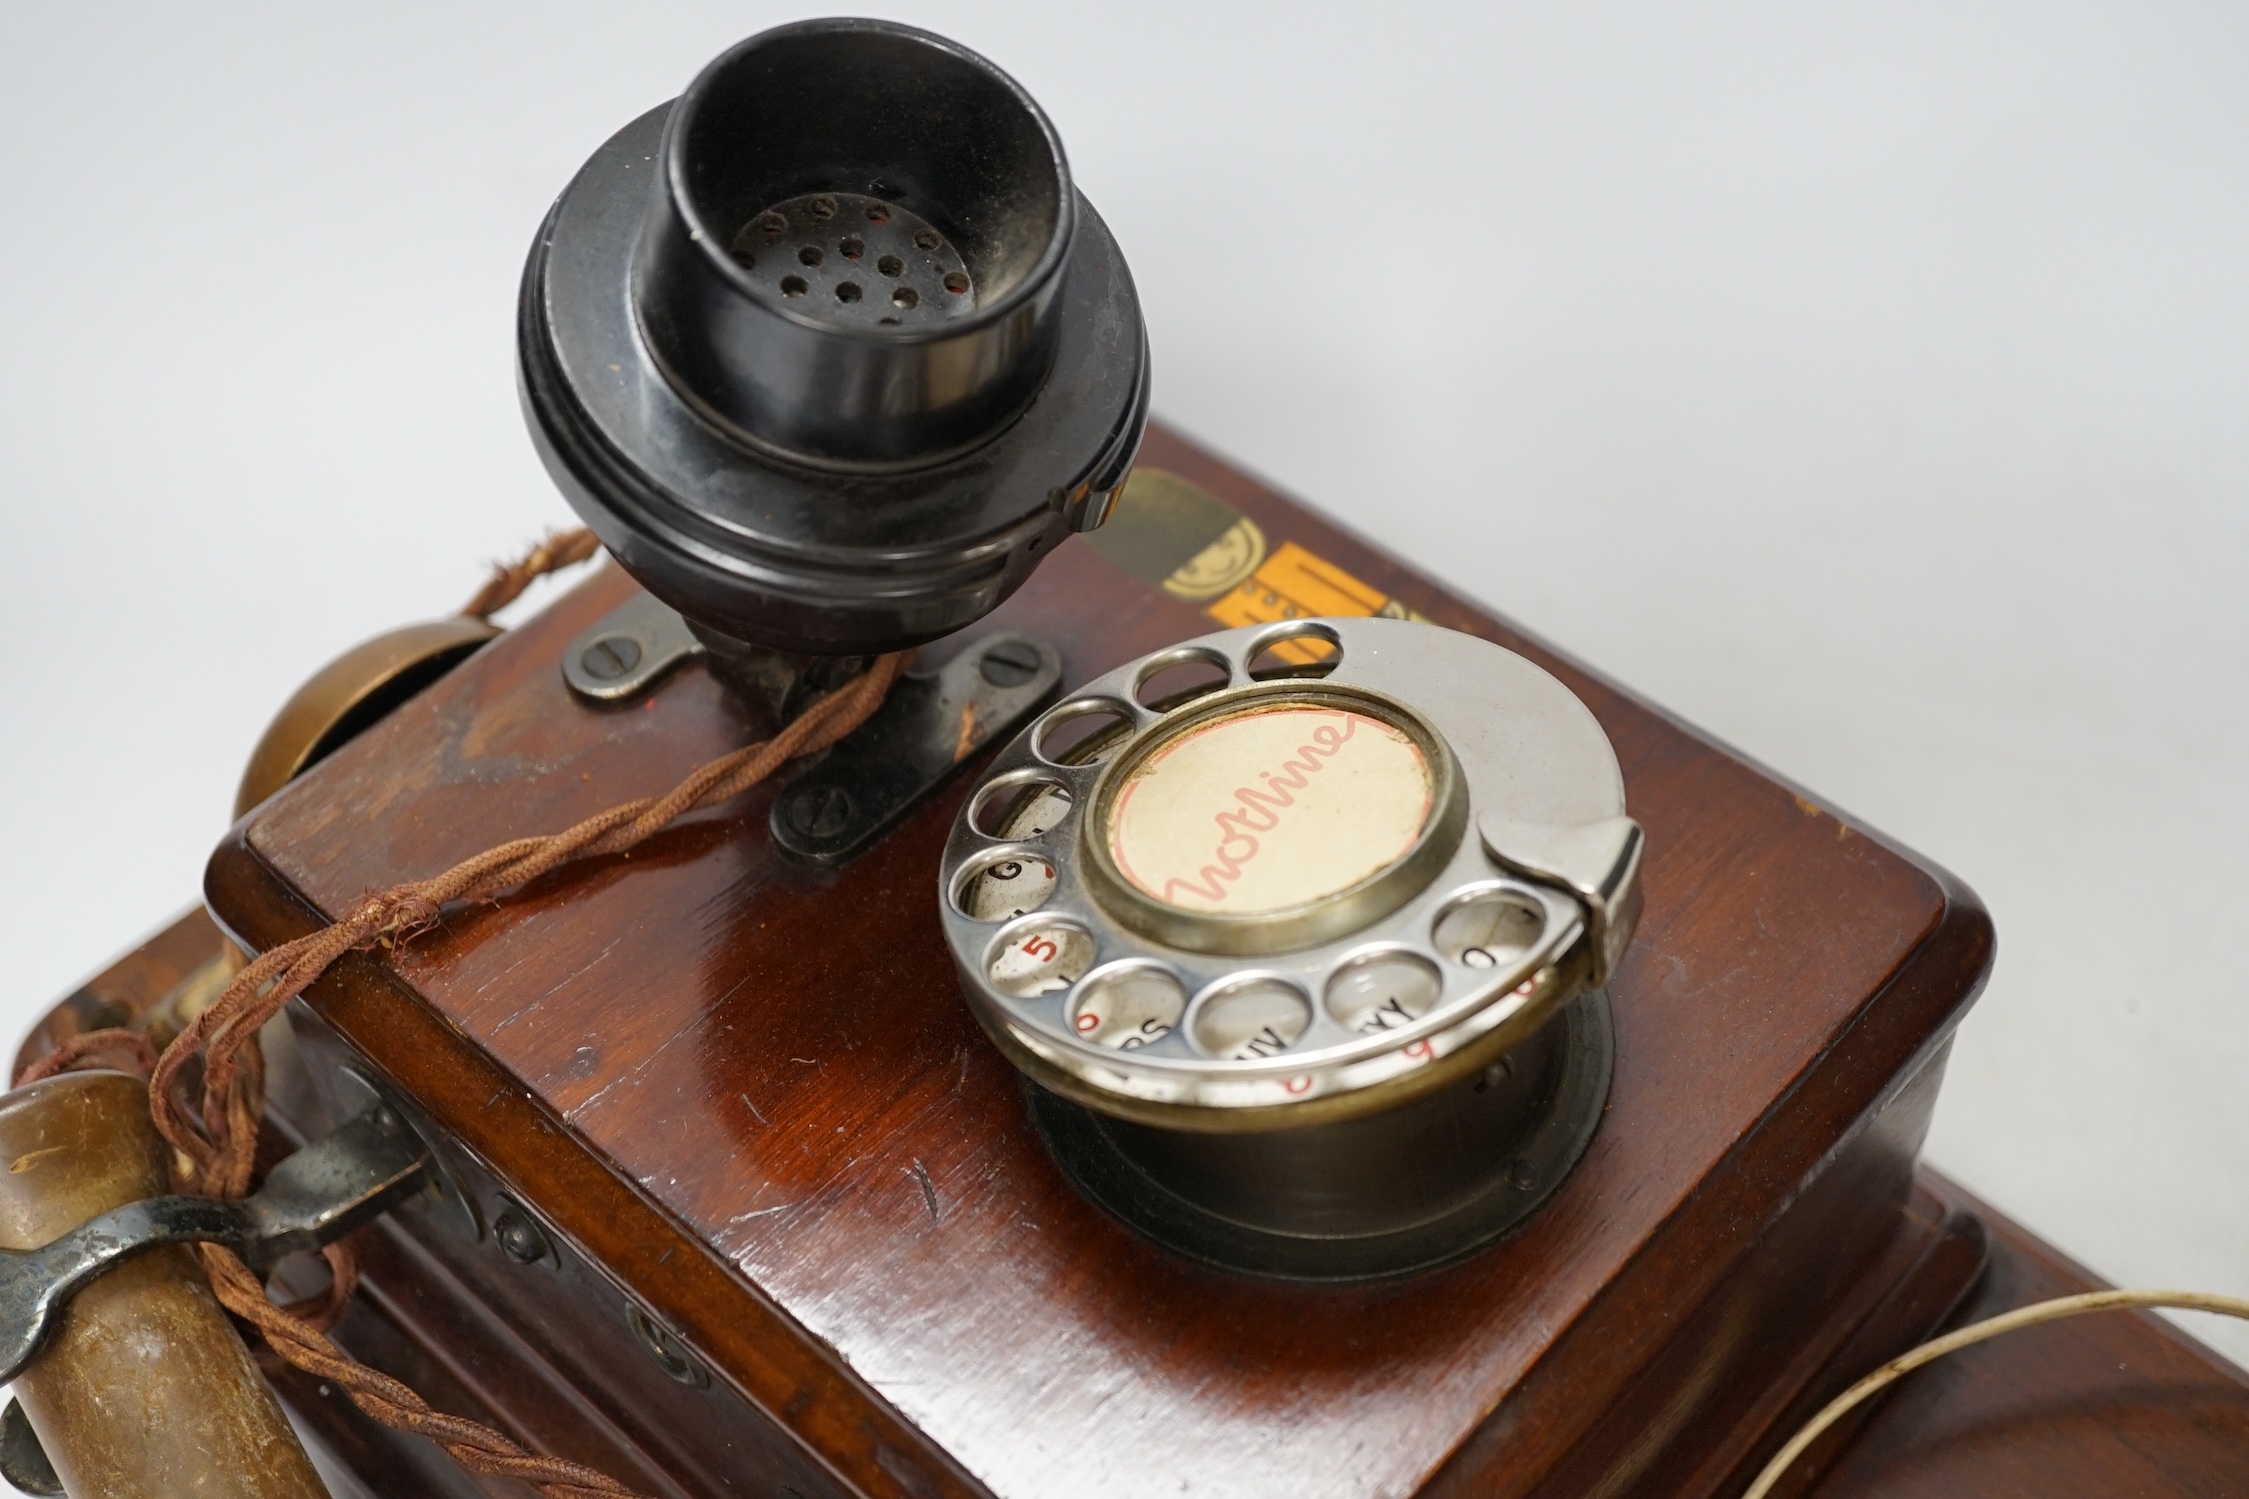 An early 20th century Hotline wall mounted telephone, 47cm long. Condition - fair